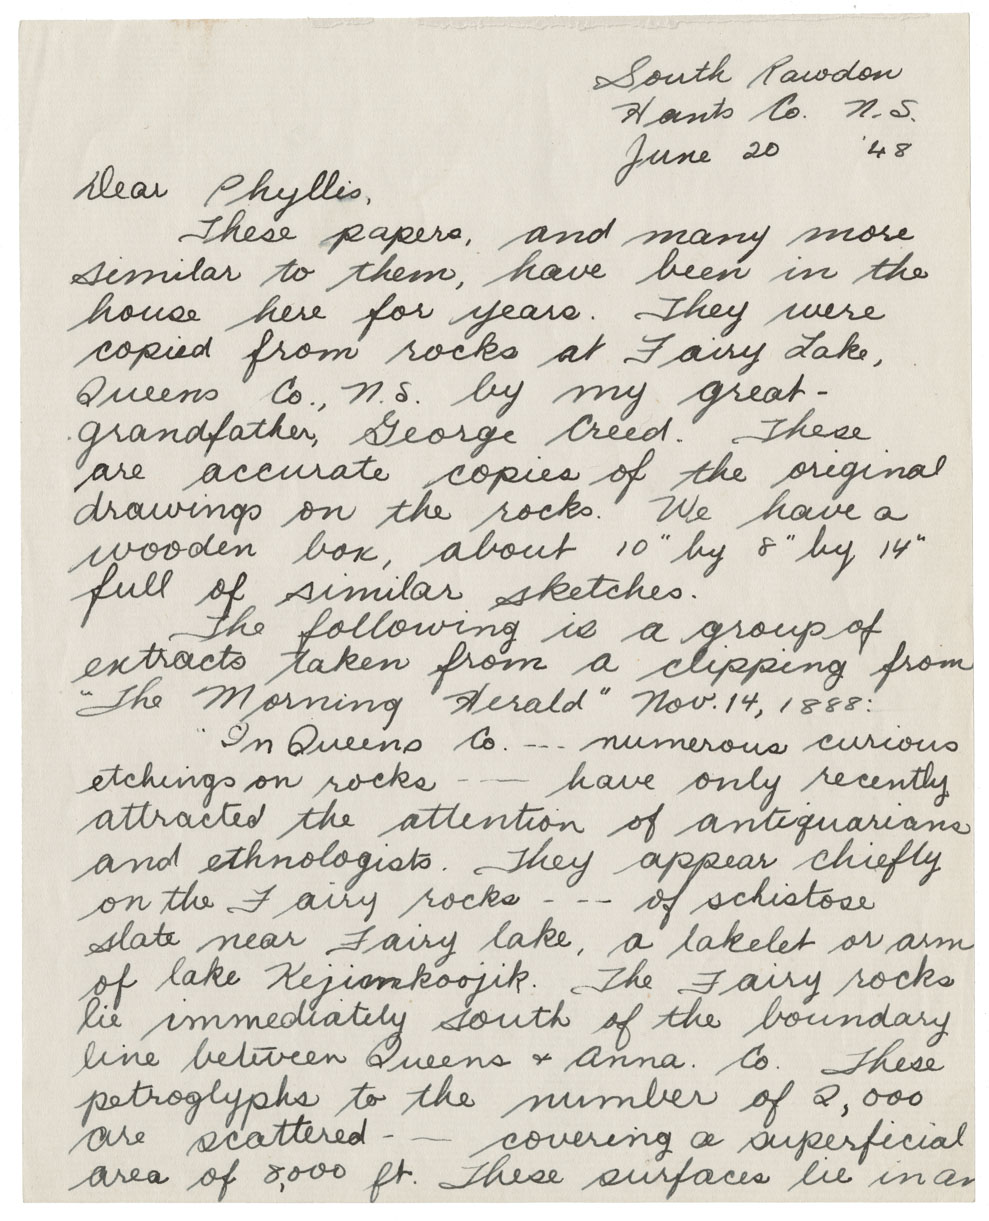 creed : Correspondence between Helen Lawson (Mrs. Leslie Haley) to Phyllis R. Blakley concerning donation of the petroglyphs